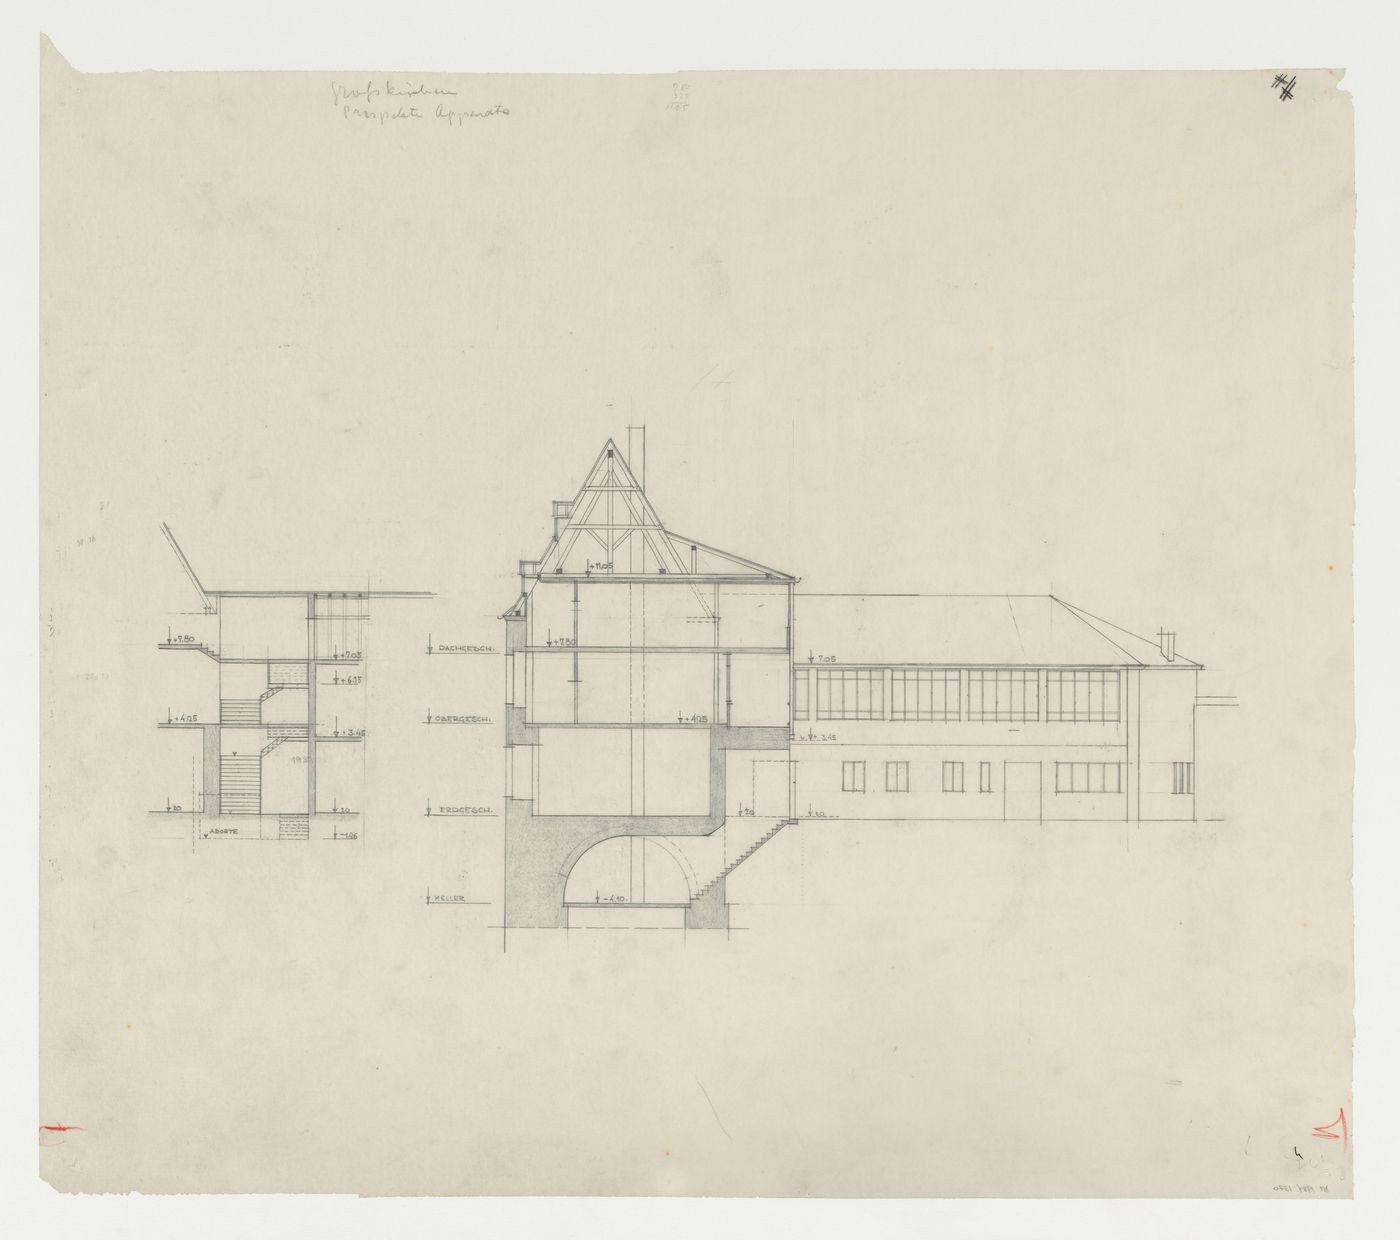 Section and sectional elevation for an addition to an existing building, possibly a school, Limburg an der Lahn, Germany